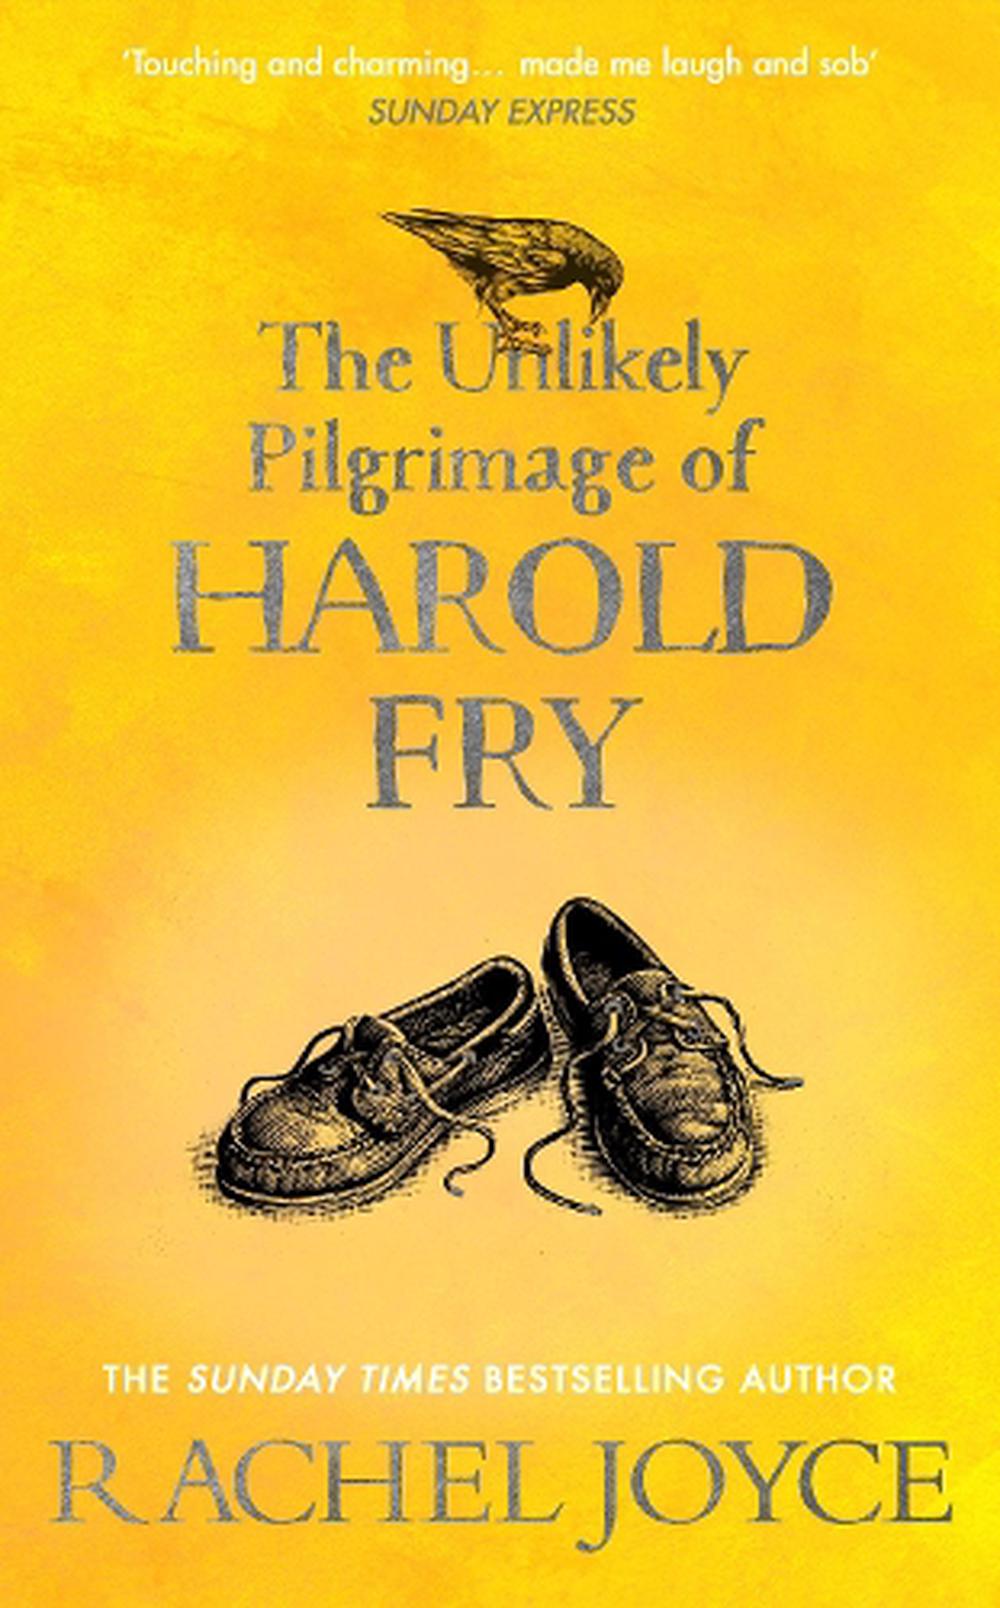 the unlikely pilgrimage of harold fry book review